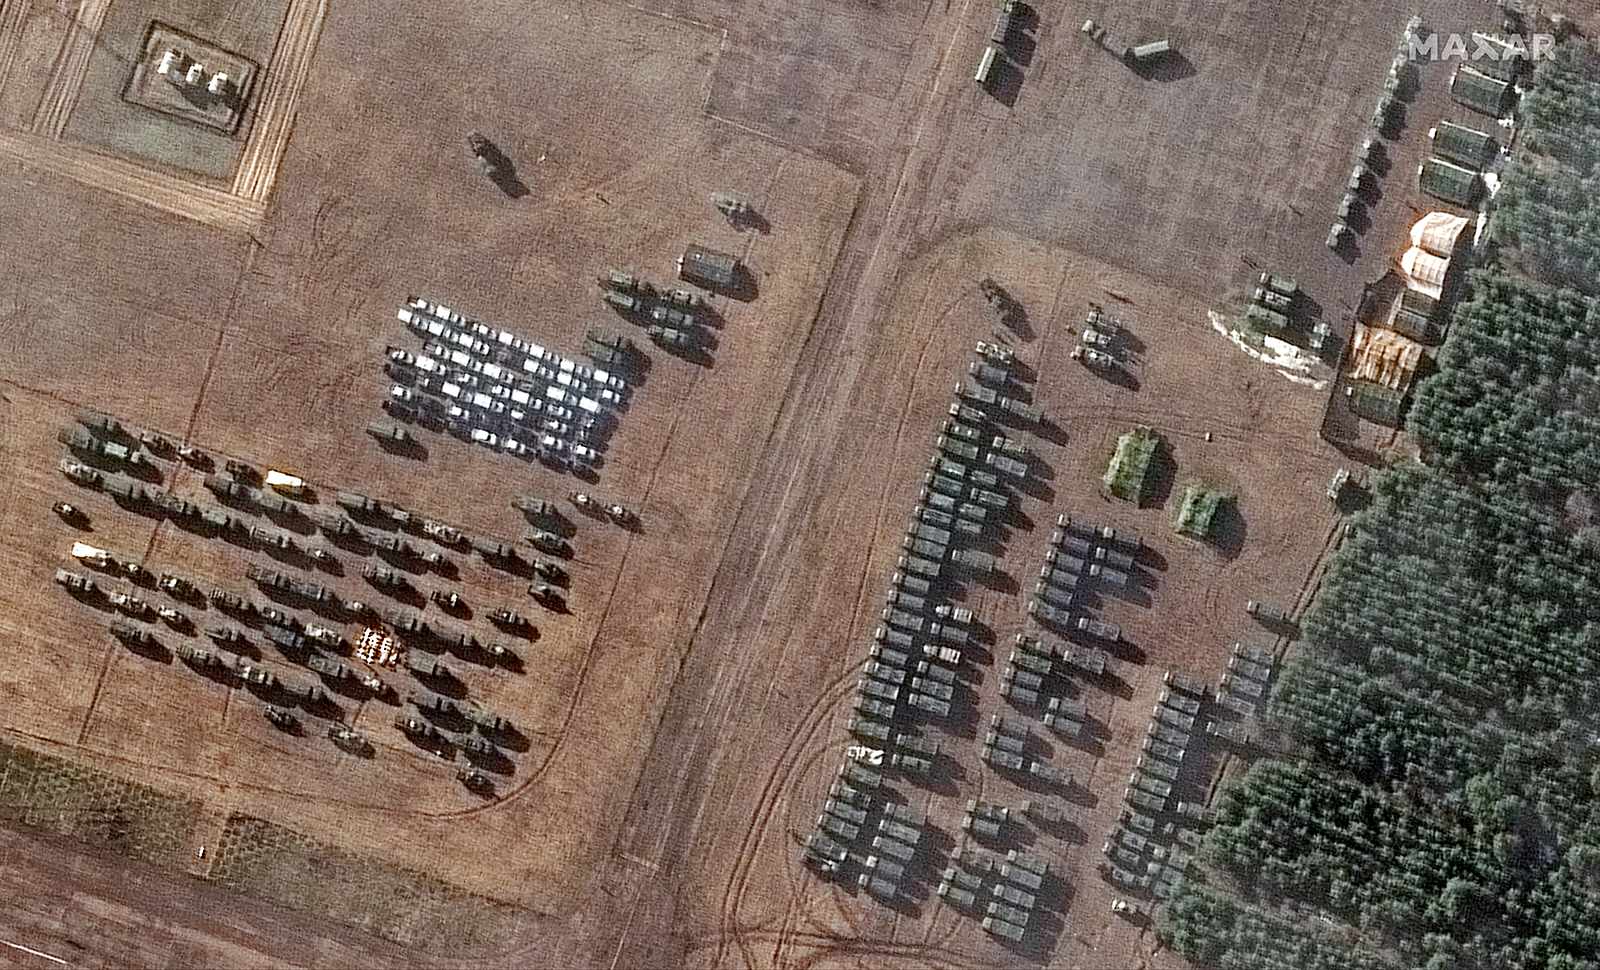 Satellite imagery shows dozens of tents and vehicles that have appeared in recent days at an airfield southwest of Mazyr in southern Belarus.